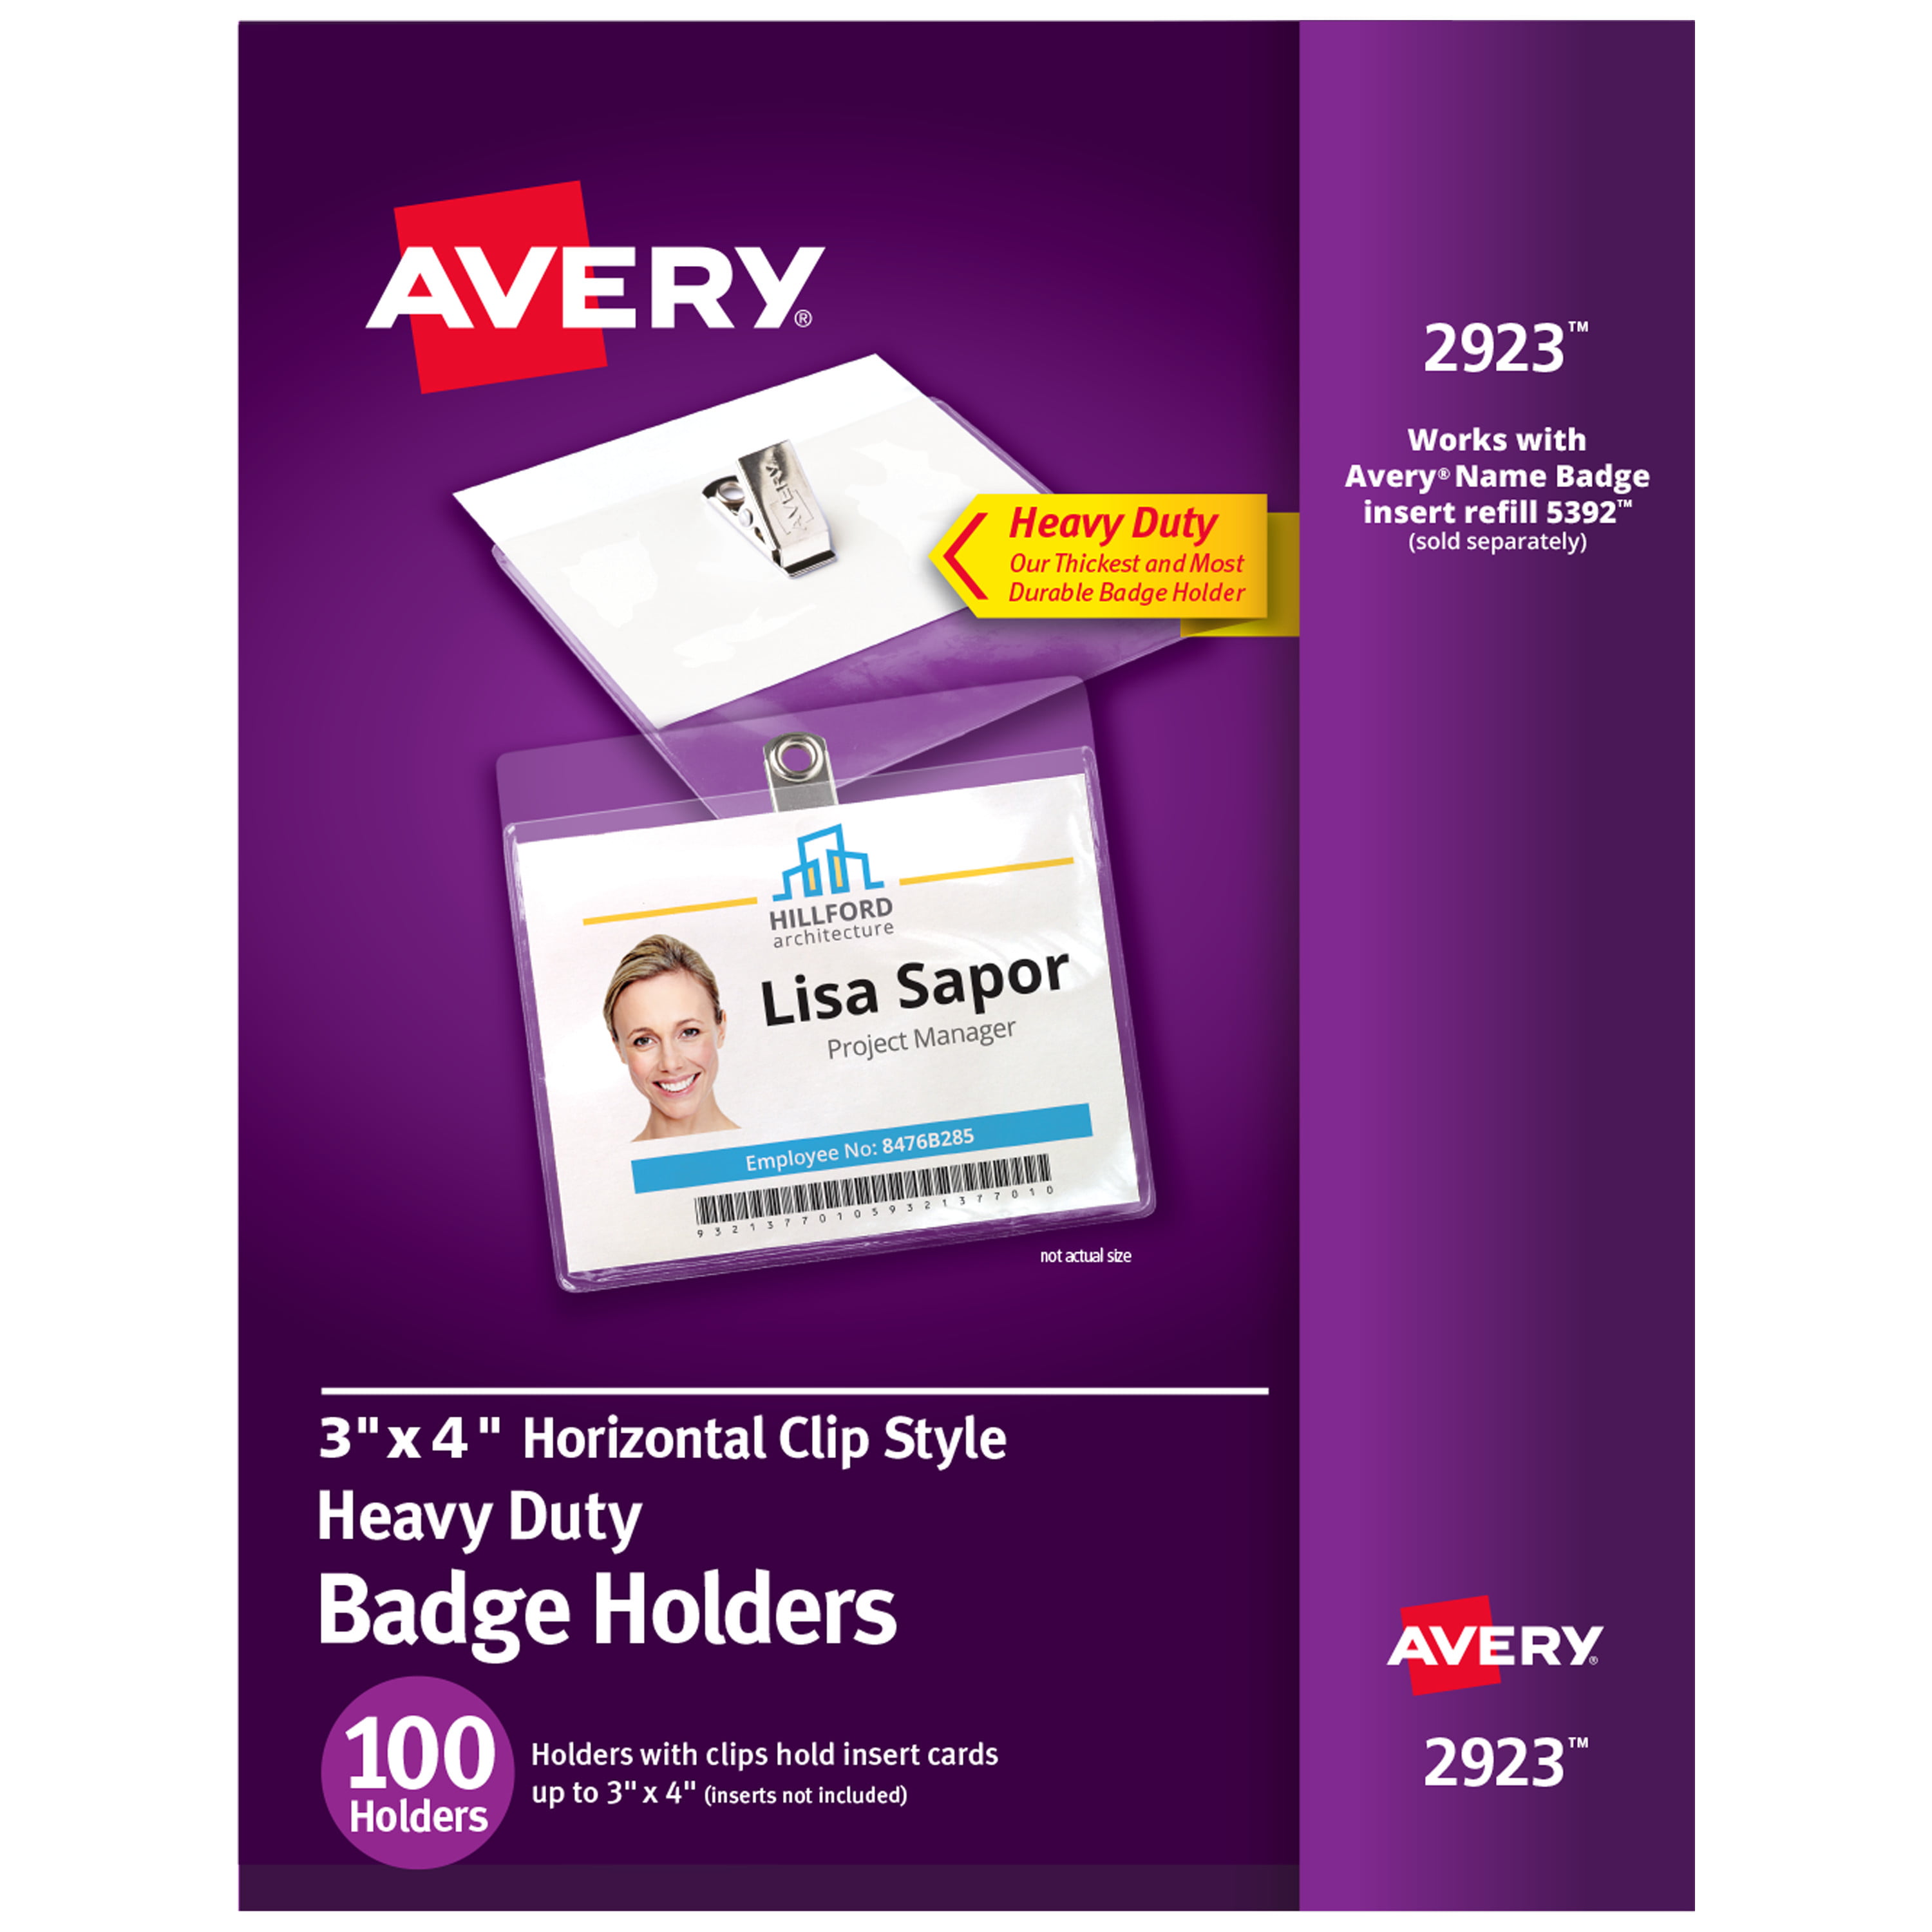 Avery Clip Style Badge Holders, 4" X 3", Landscape, 100 Id Badge Holders With Clips (02923) - Walmart.com